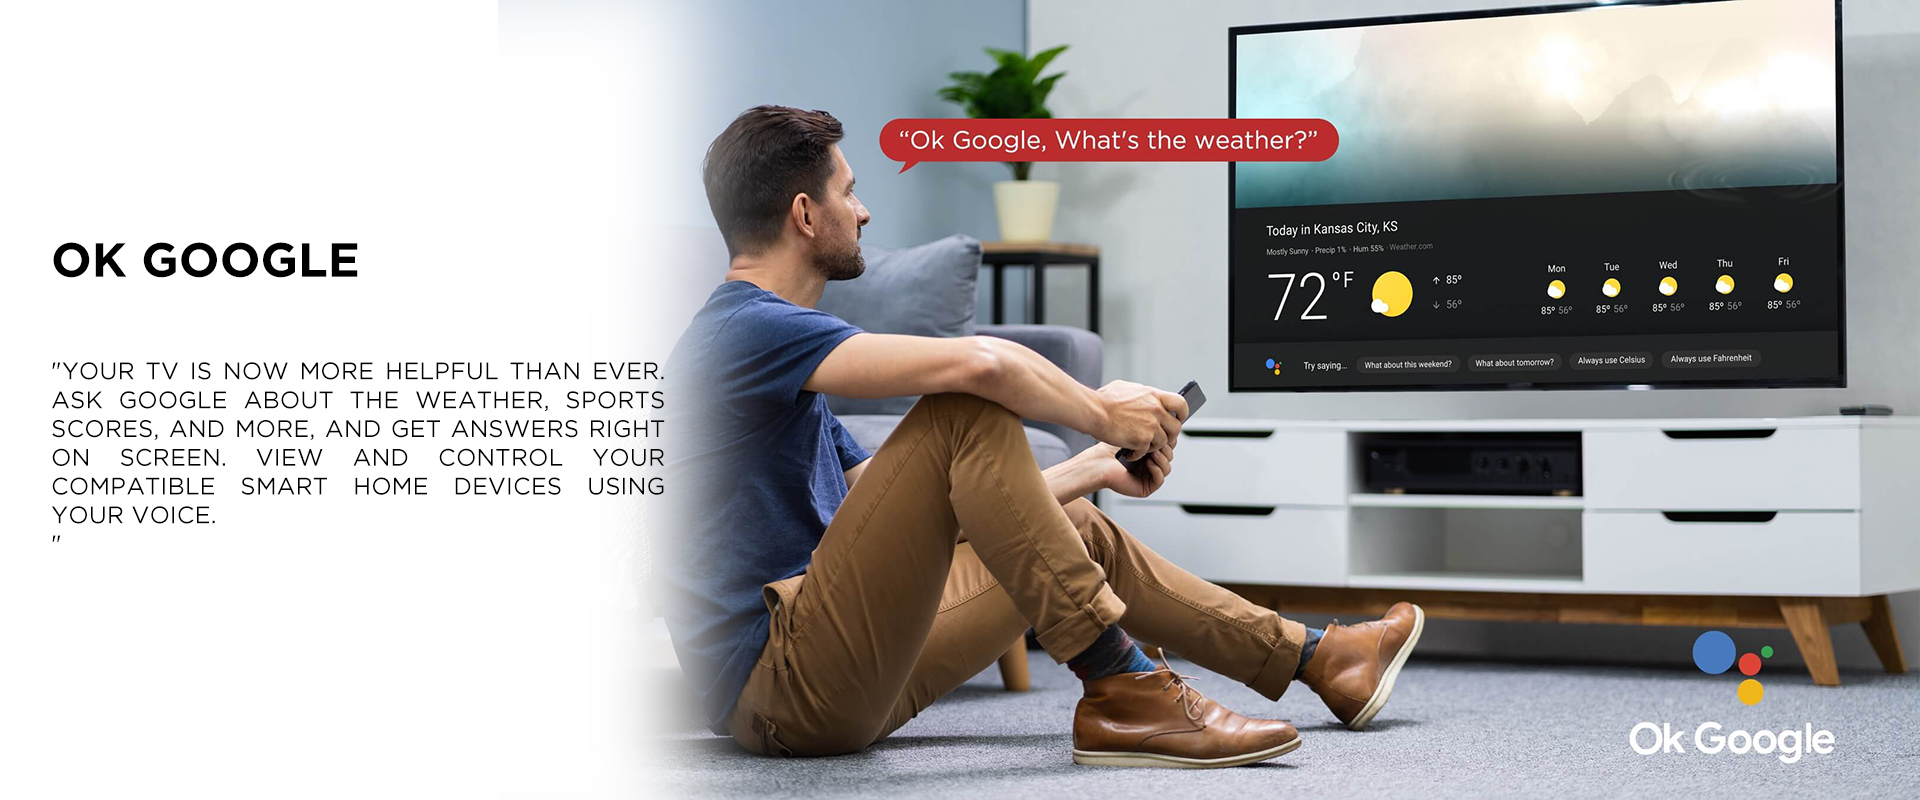 OK GOOGLE - Your TV is now more helpful than ever. Ask Google about the weather, sports scores, and more, and get answers right on screen. View and control your compatible smart home devices using your voice.